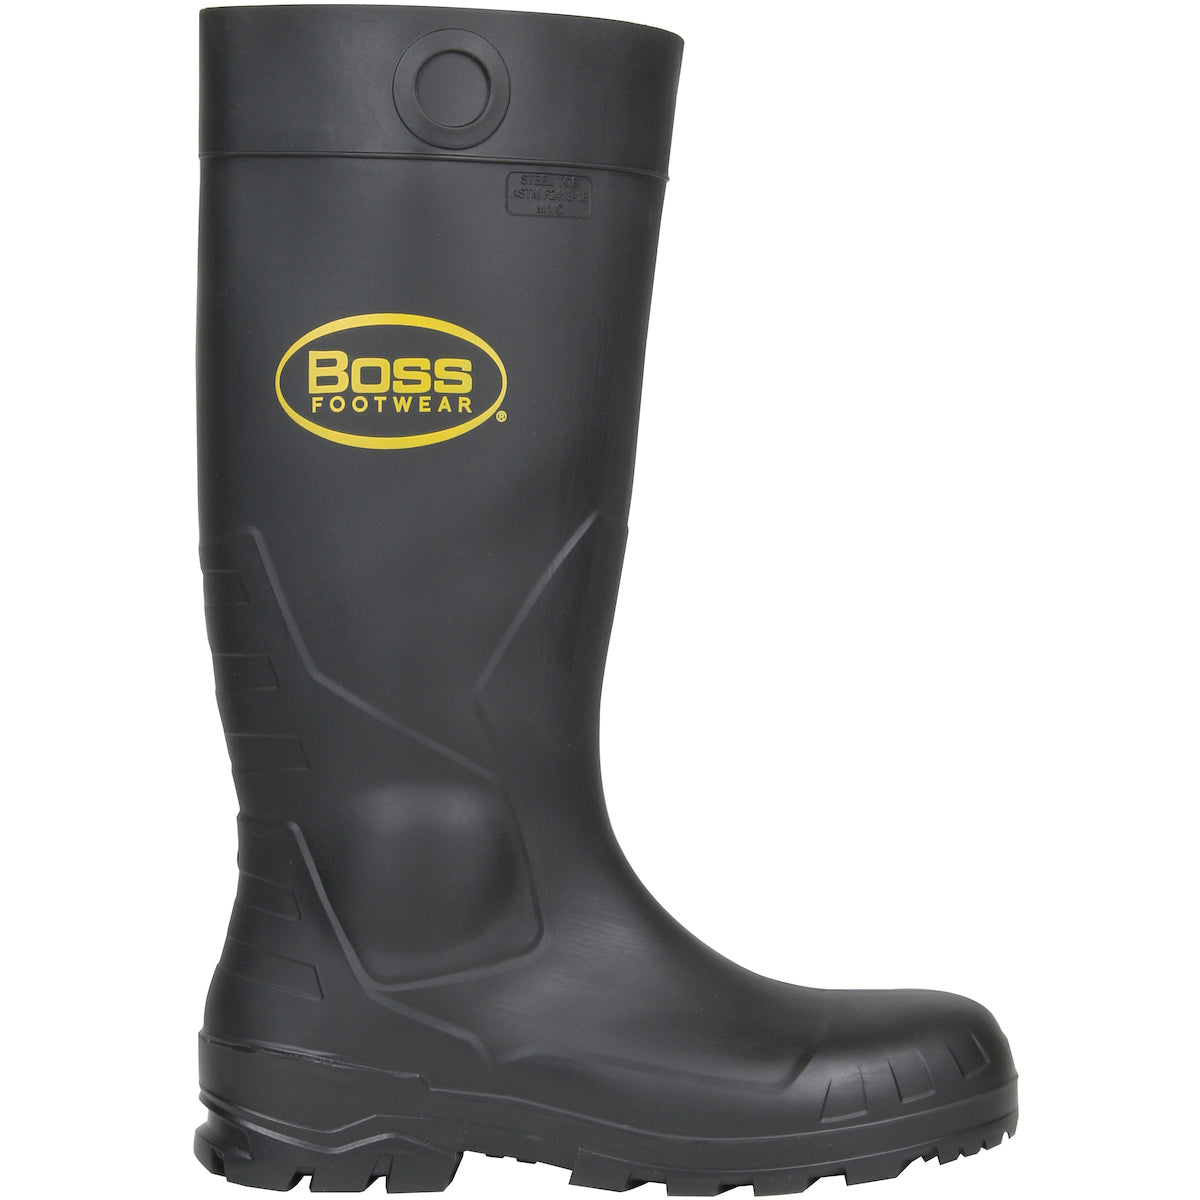 Boss 383-820/6 Black PVC Full Safety Steel Toe and Midsole Boot